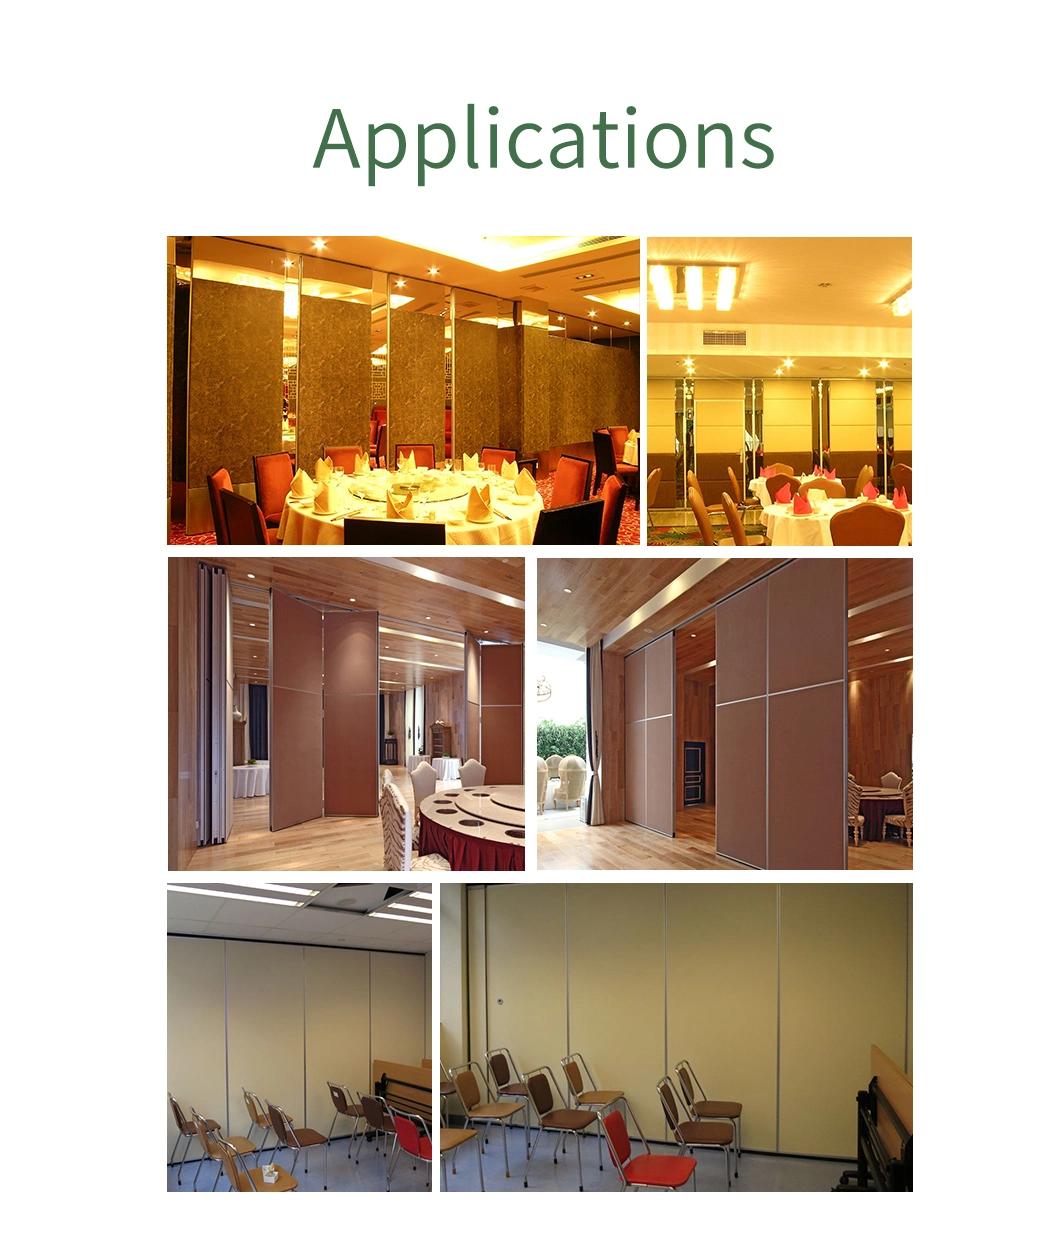 High Sound Insulation Mobile Partitions Movable Walls for Multi-Function Hall for Office or Meeting Room